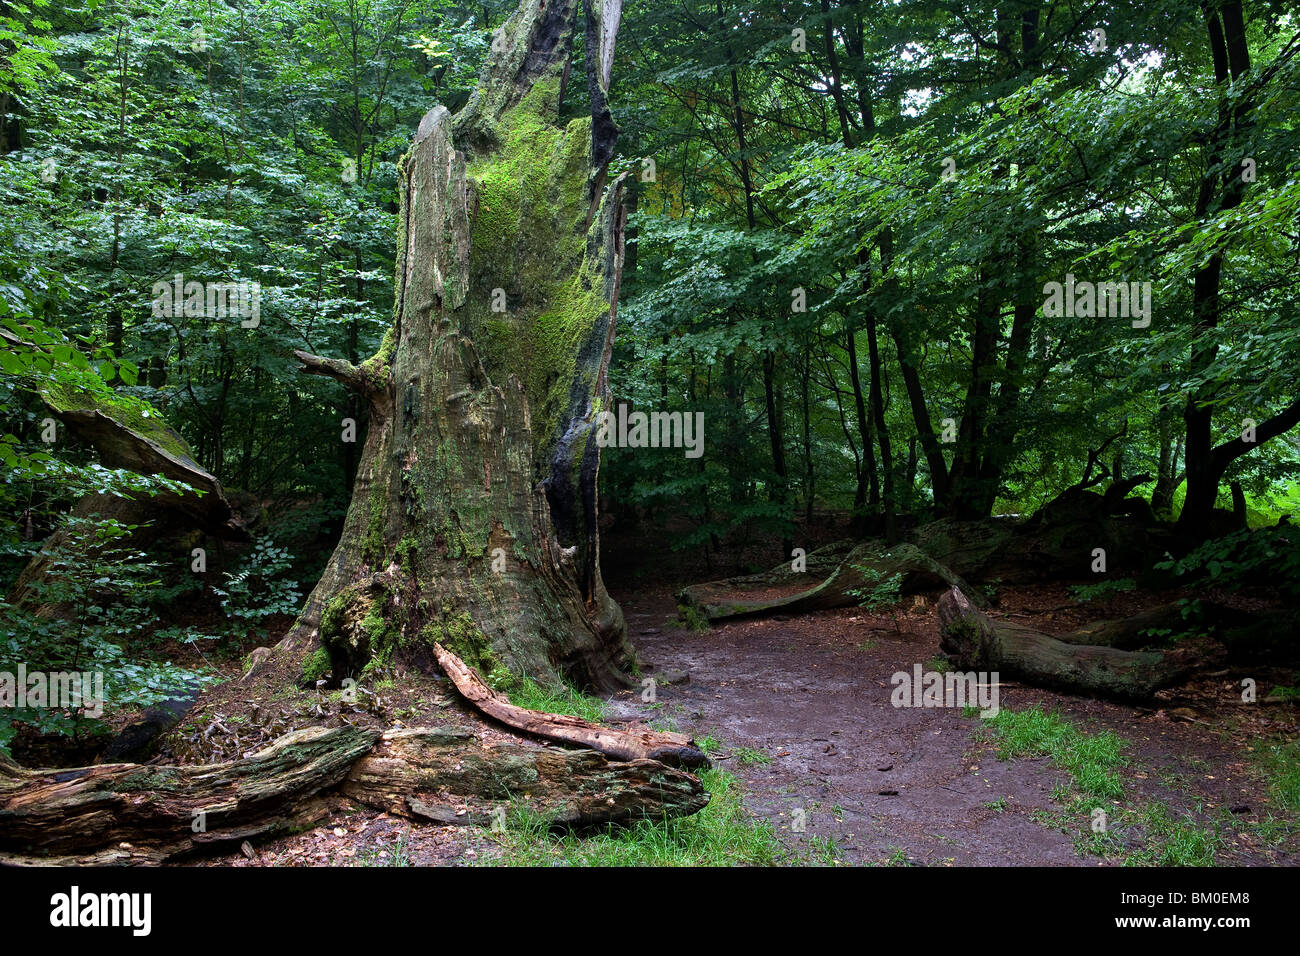 Ancient forest with old trees, Reinhardswald, Kassel, Hesse, Germany, Europe Stock Photo